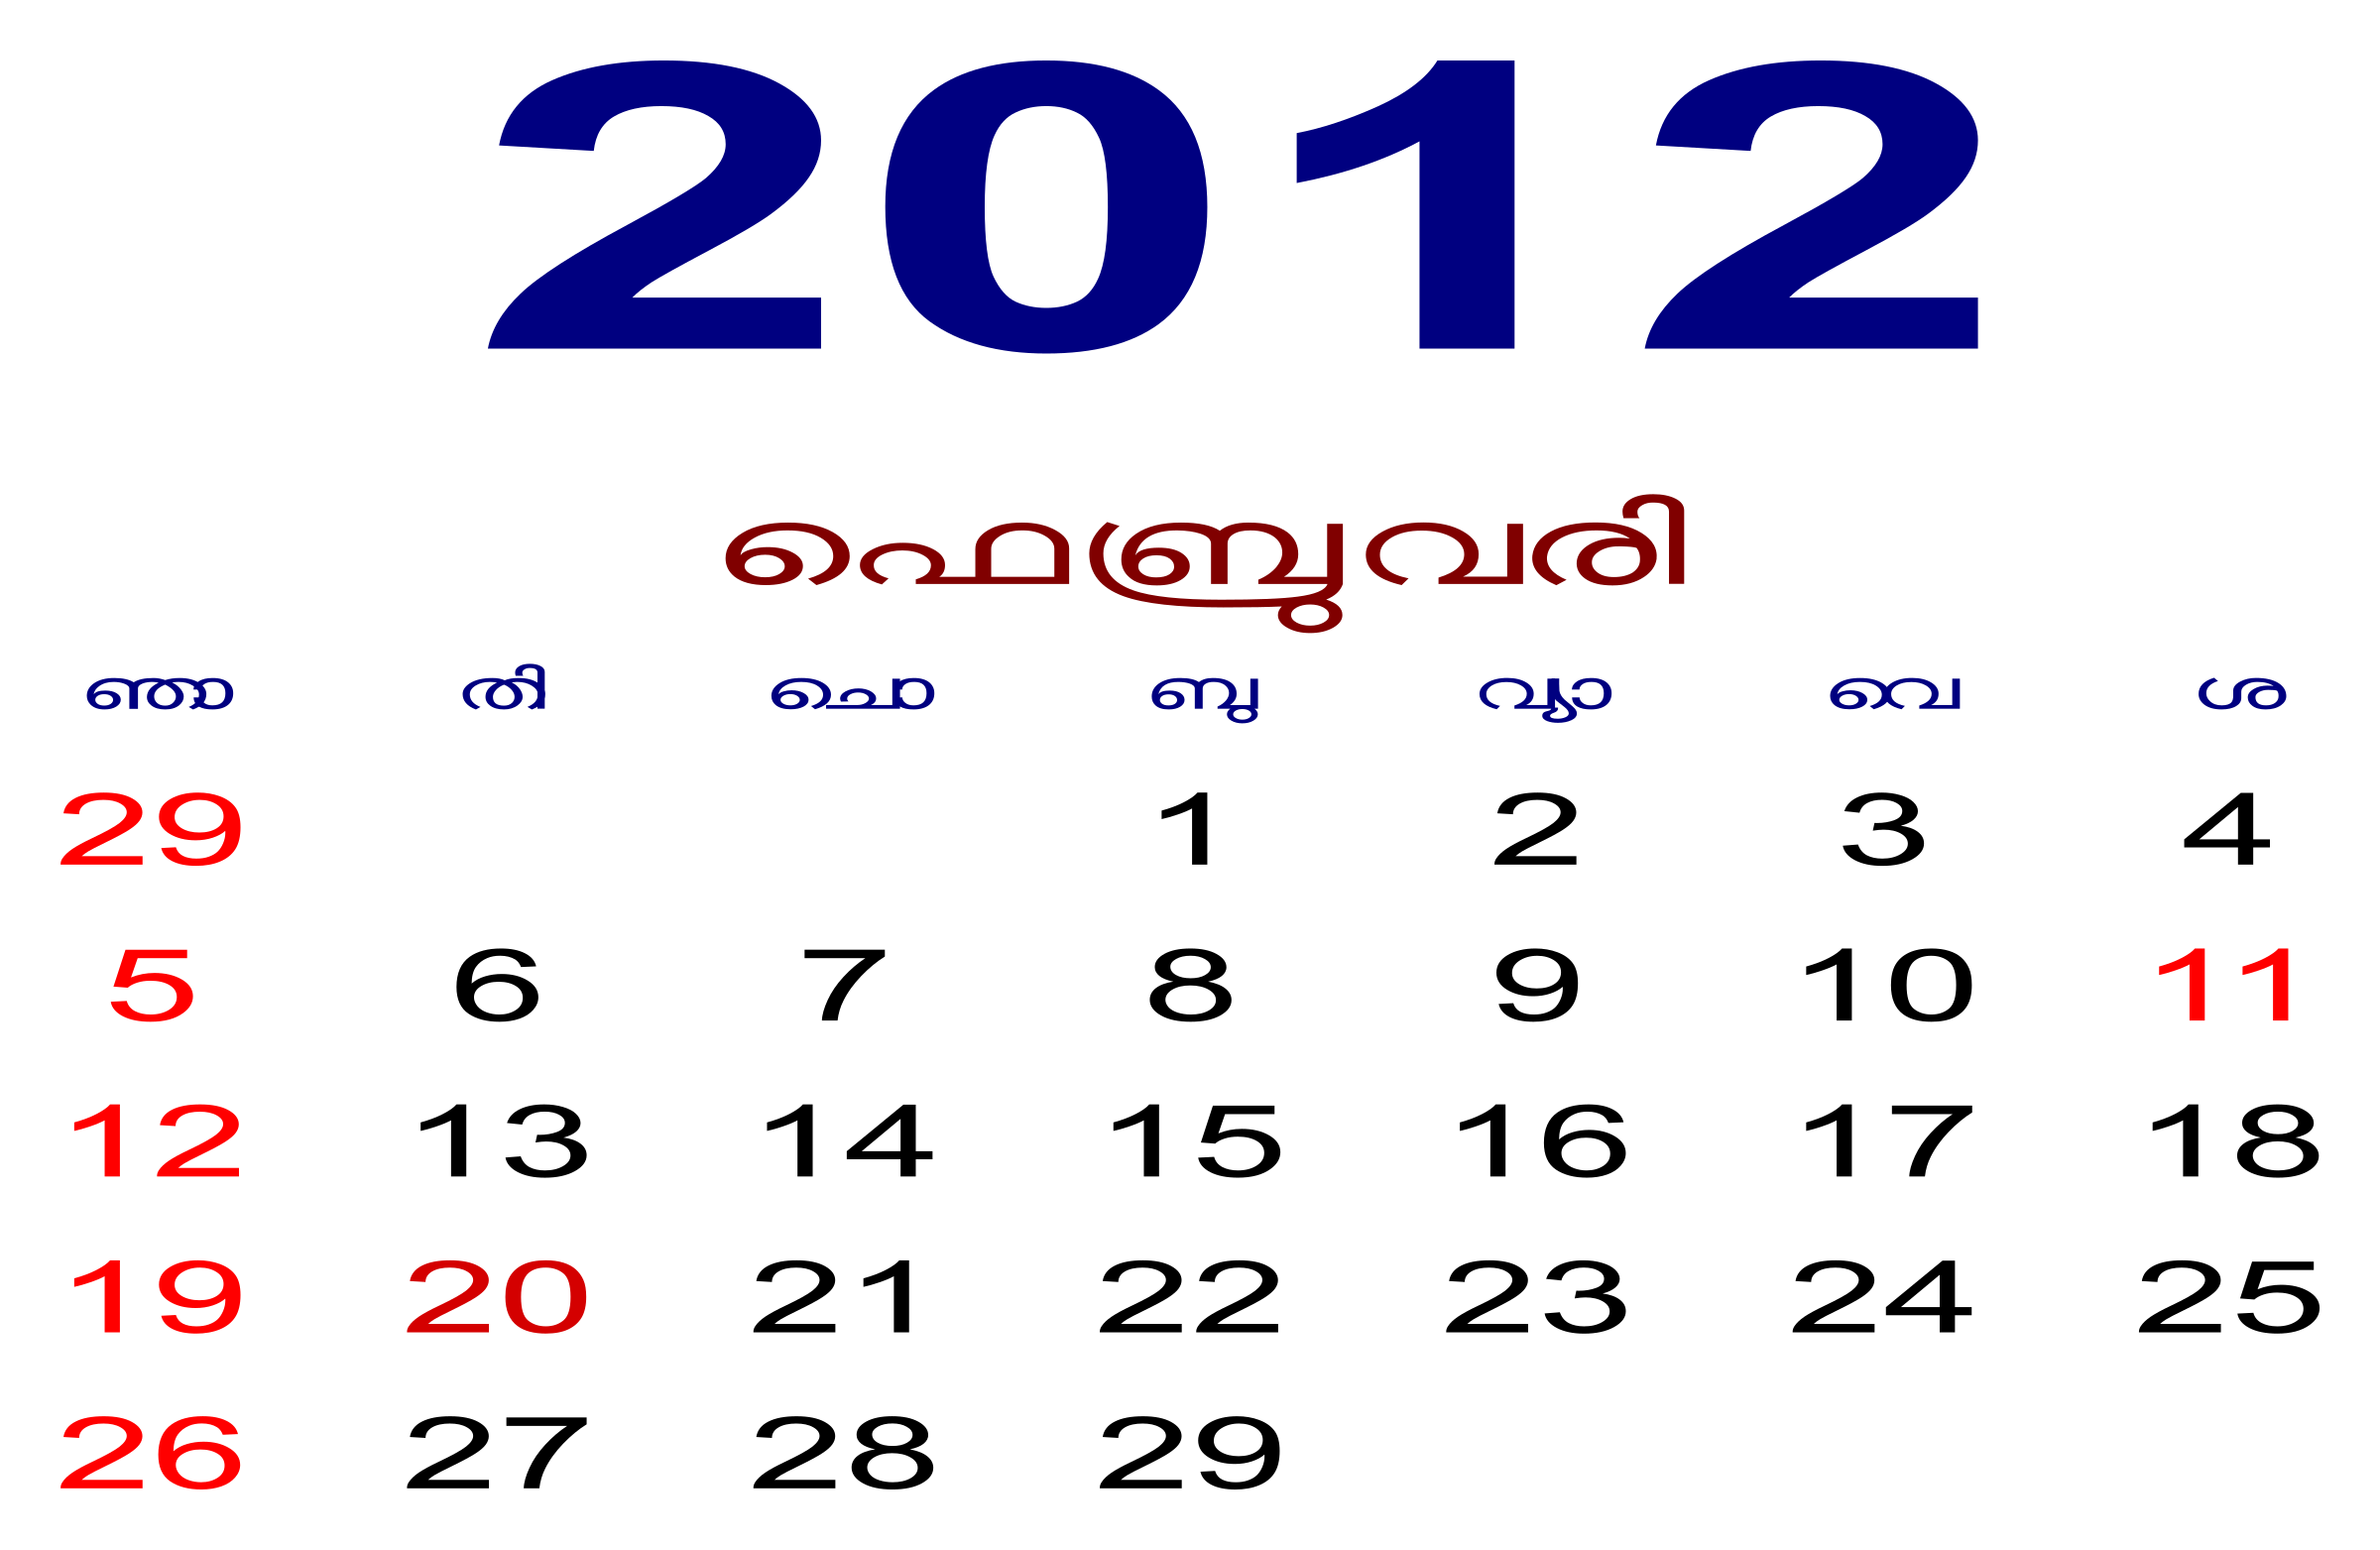 February Month Malayalam Calender 2012 Open Source SVG Clip arts